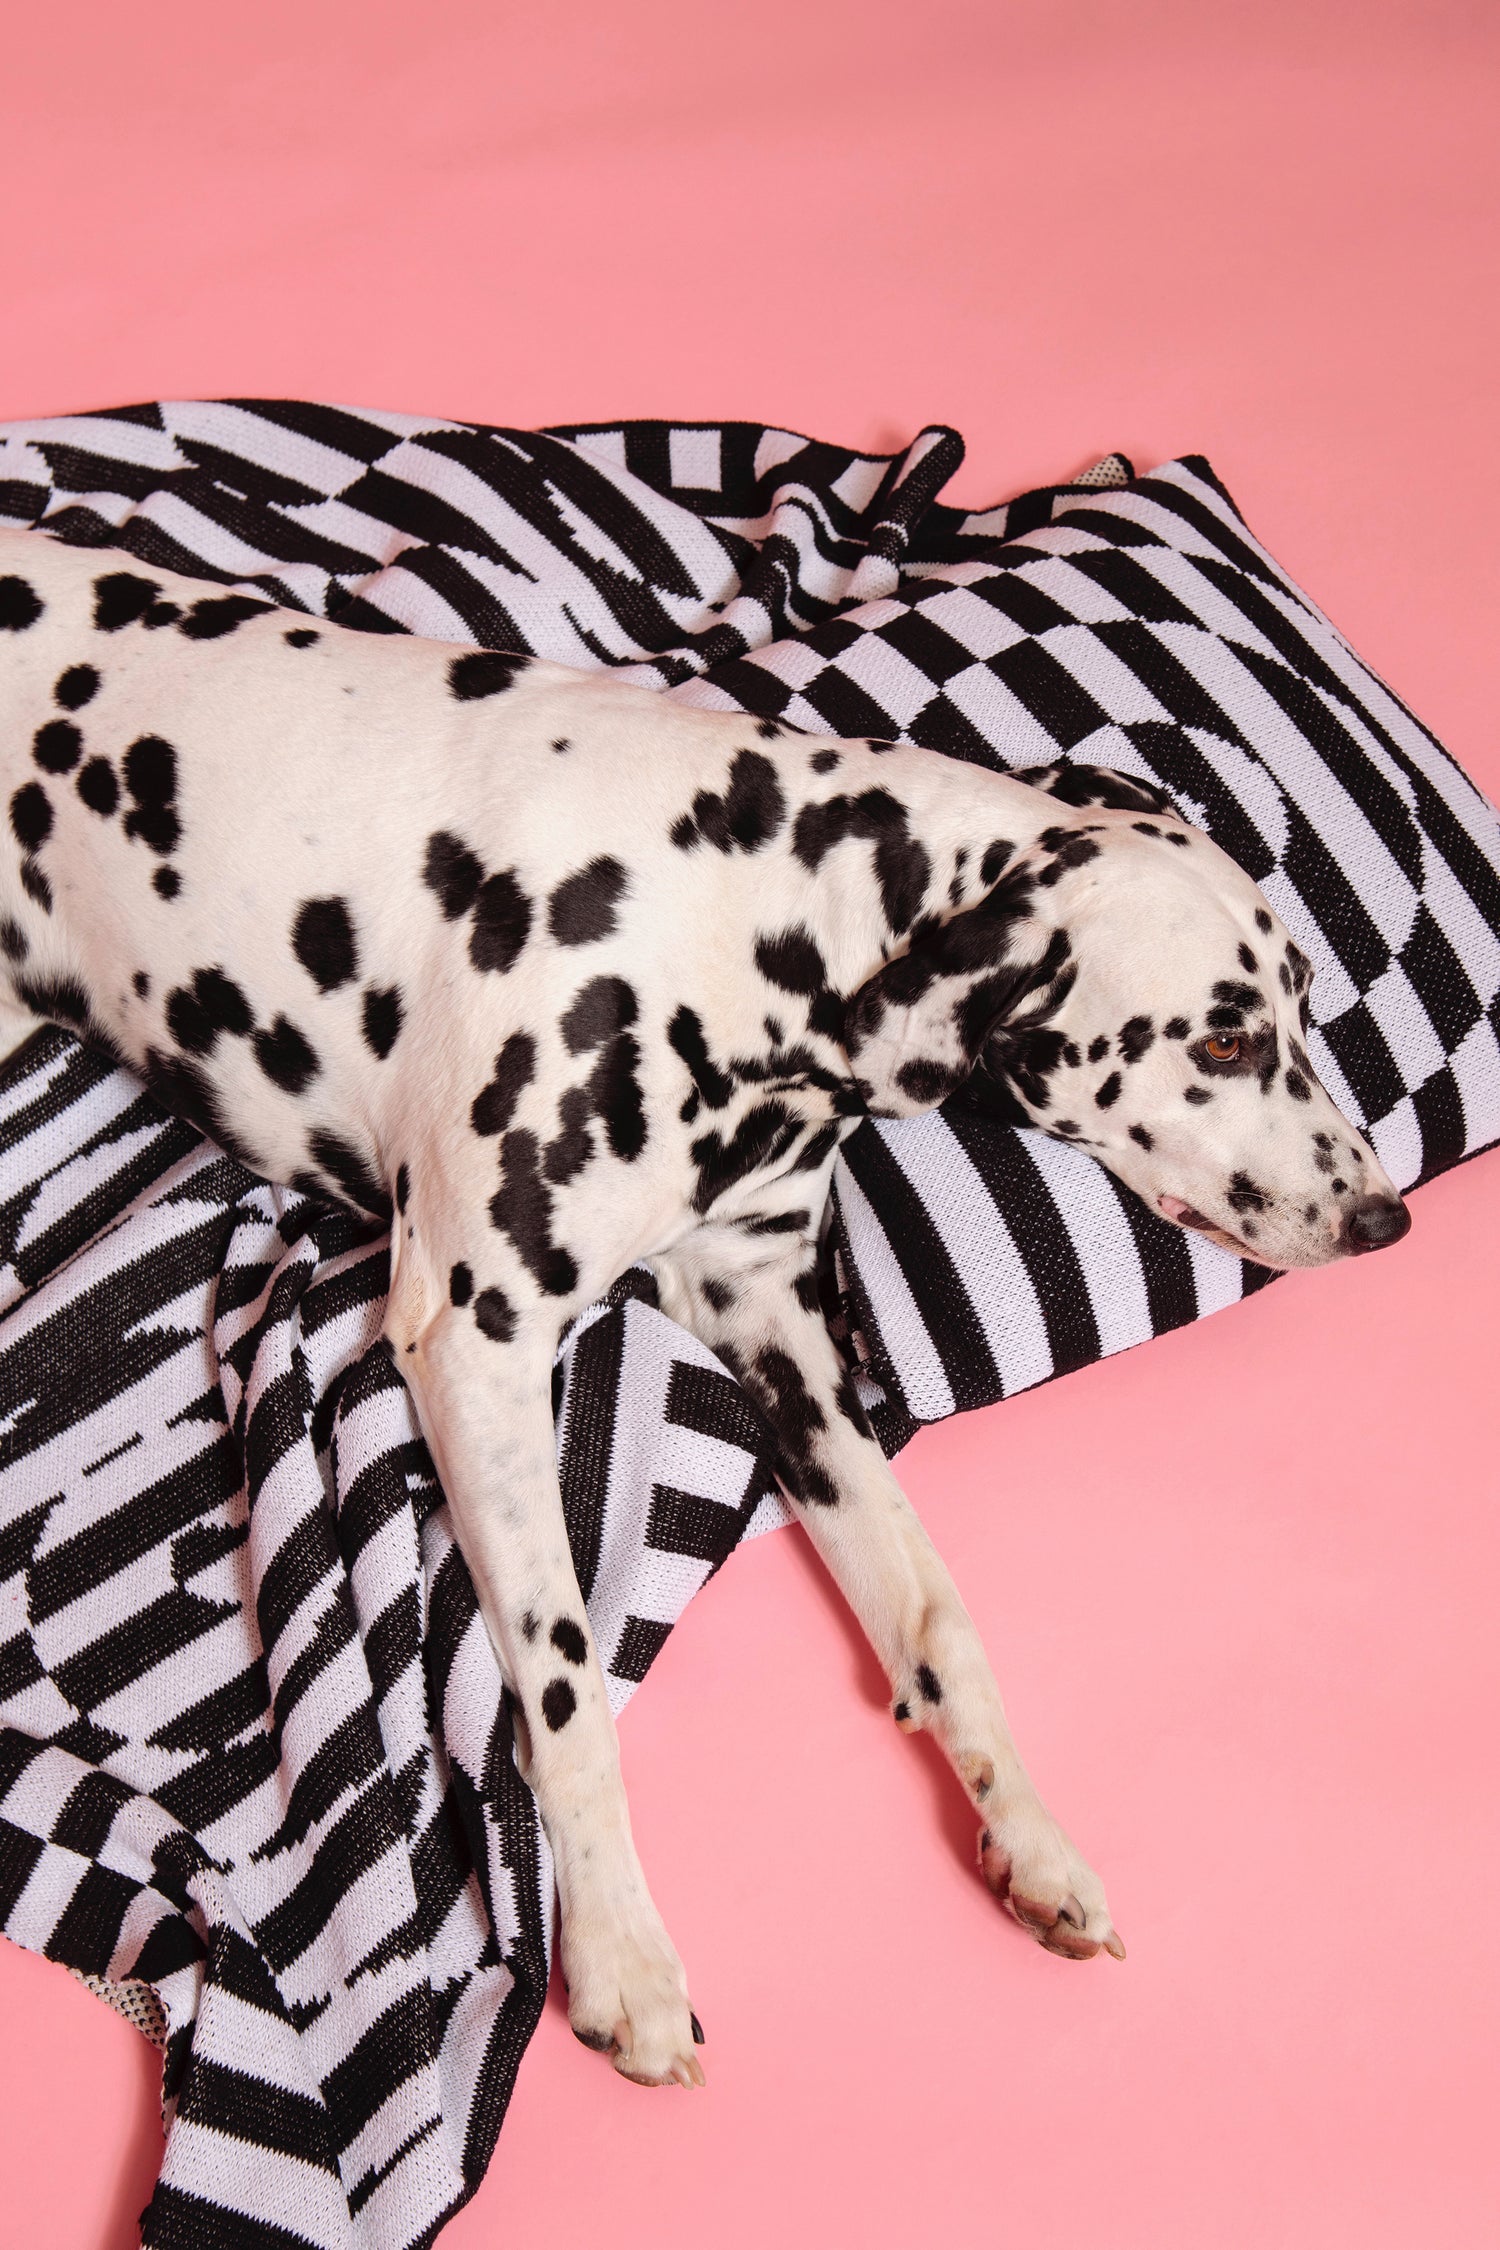 Image of Dalmatian dog laying on top of the Dazzle Blanket with its head resting on the Dazzle Pillow cover against a pink background.